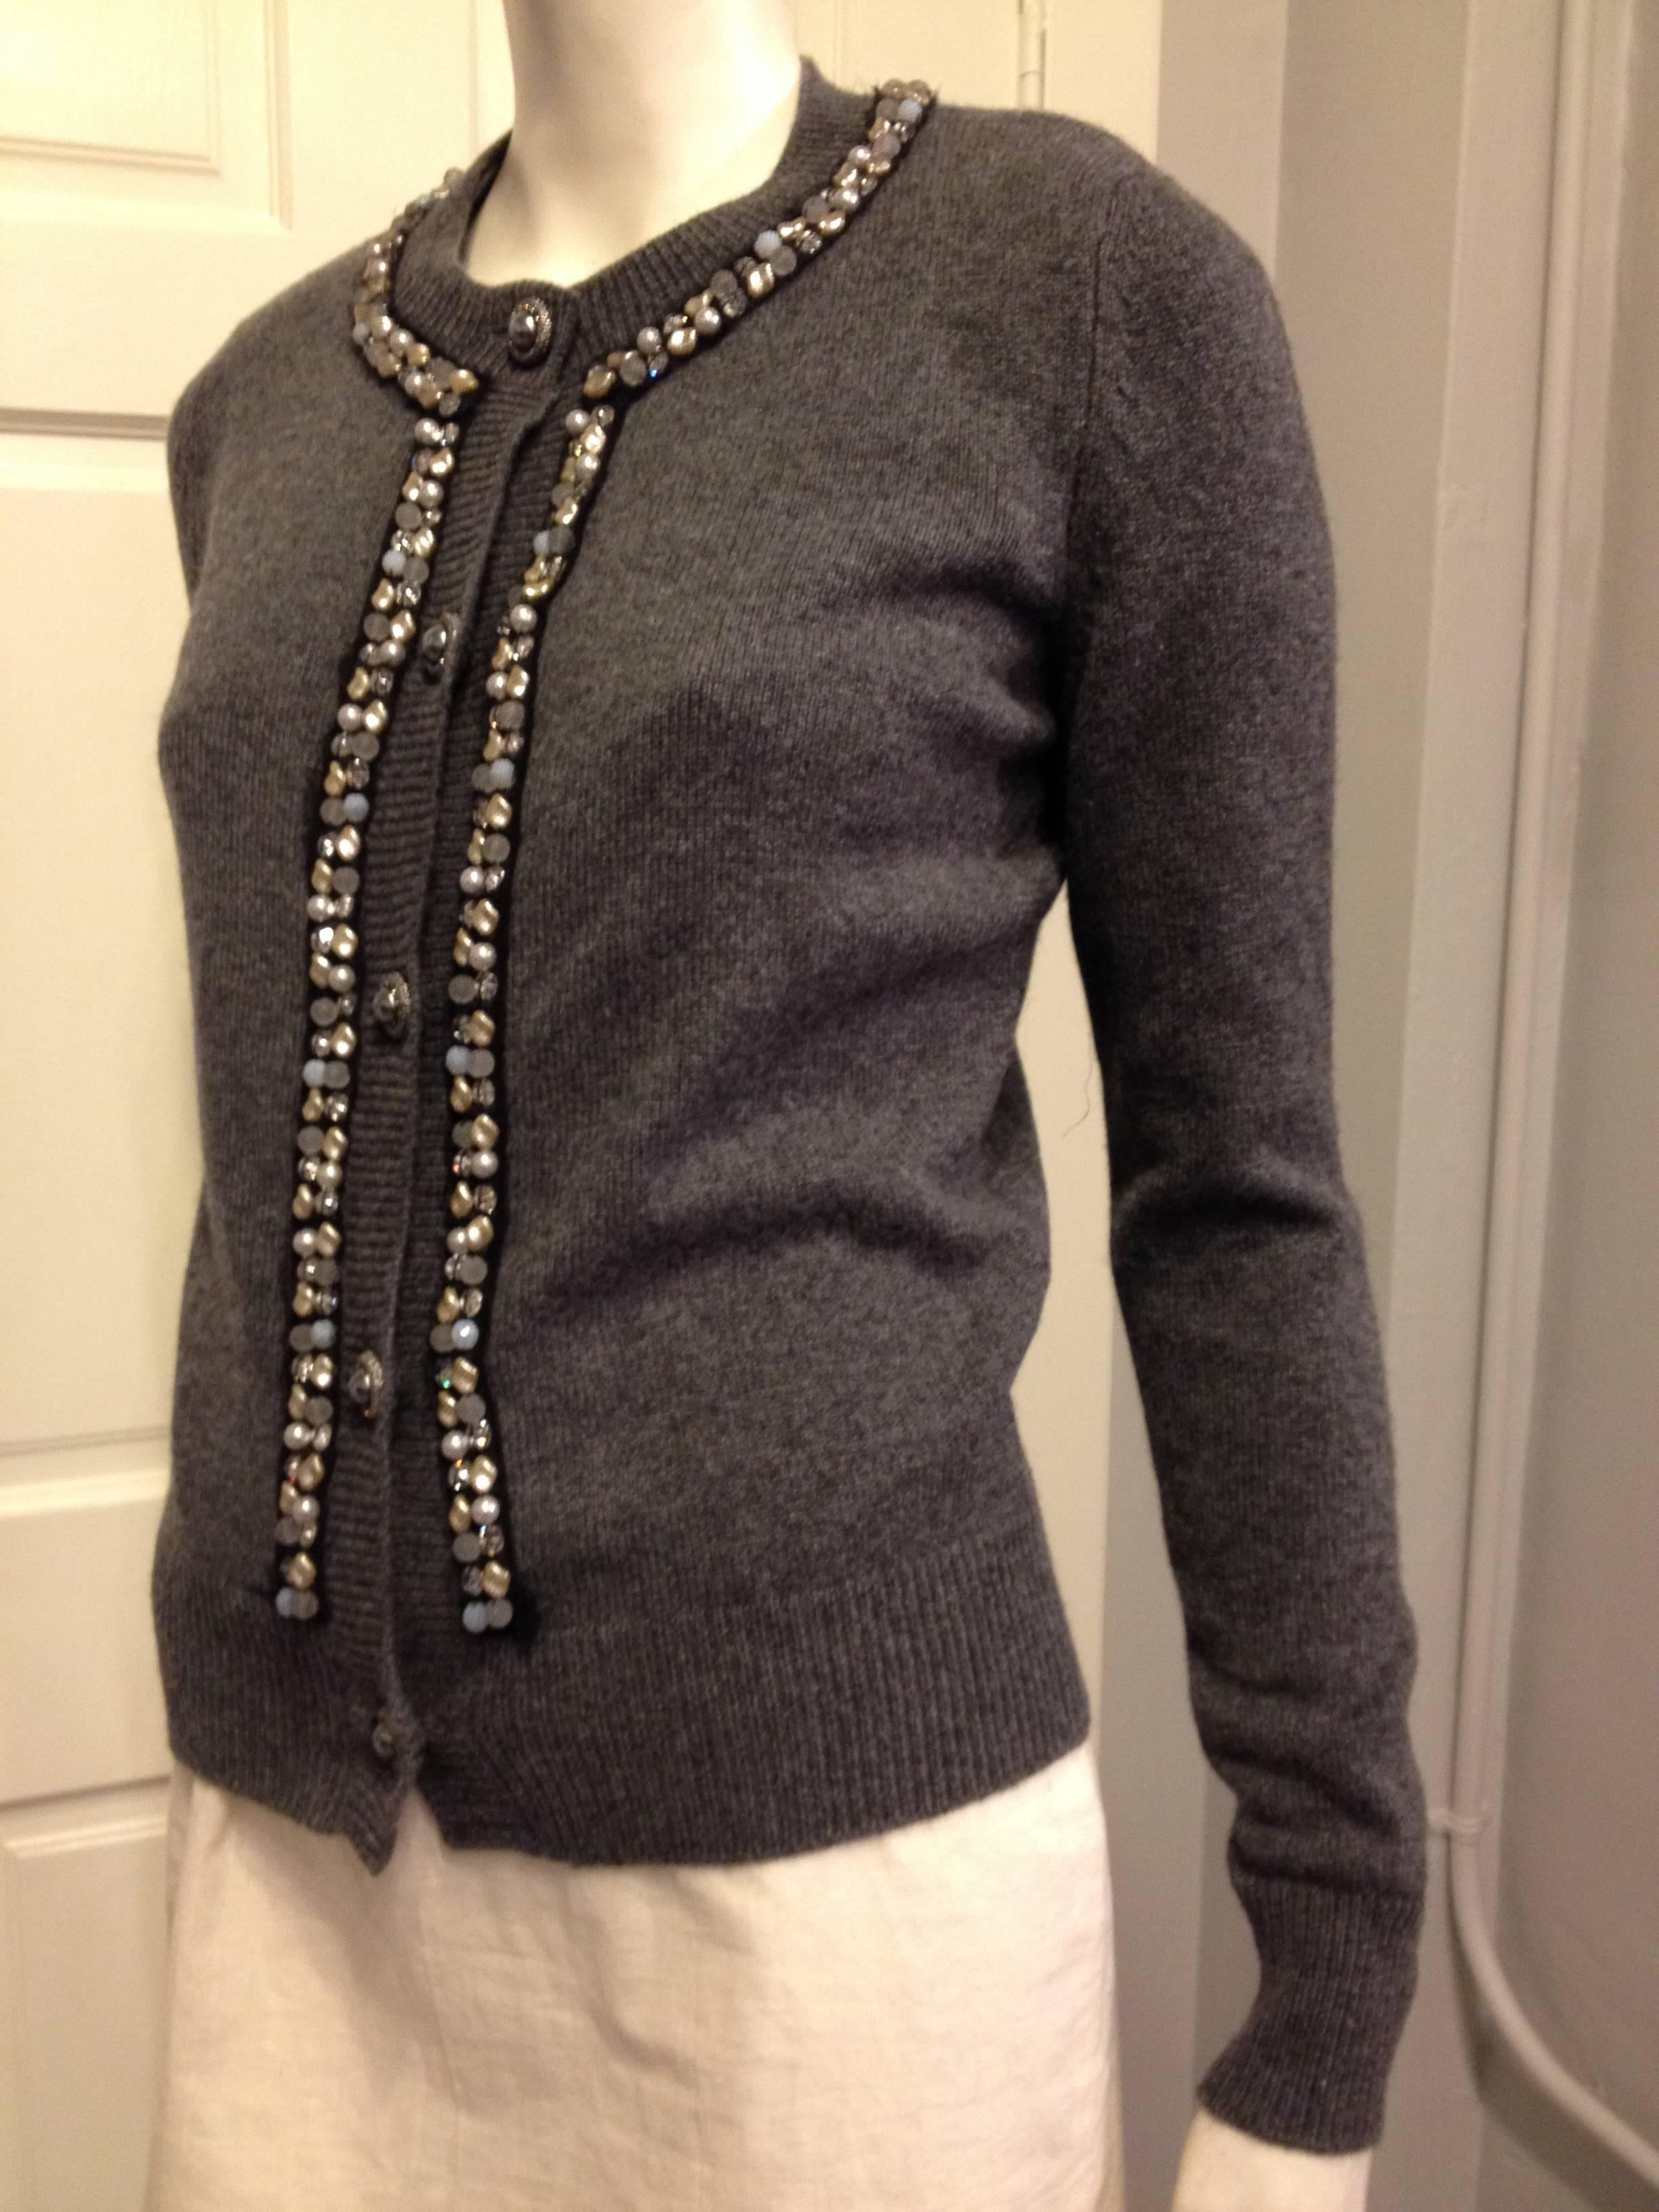 Plush, comfortable, and chic in the most Chanel way - this cashmere cardigan in an elegant soft charcoal grey is the most perfect thing. The cut is classic with a round neckline and ribbed trim, while the front is decorated with an assortment of